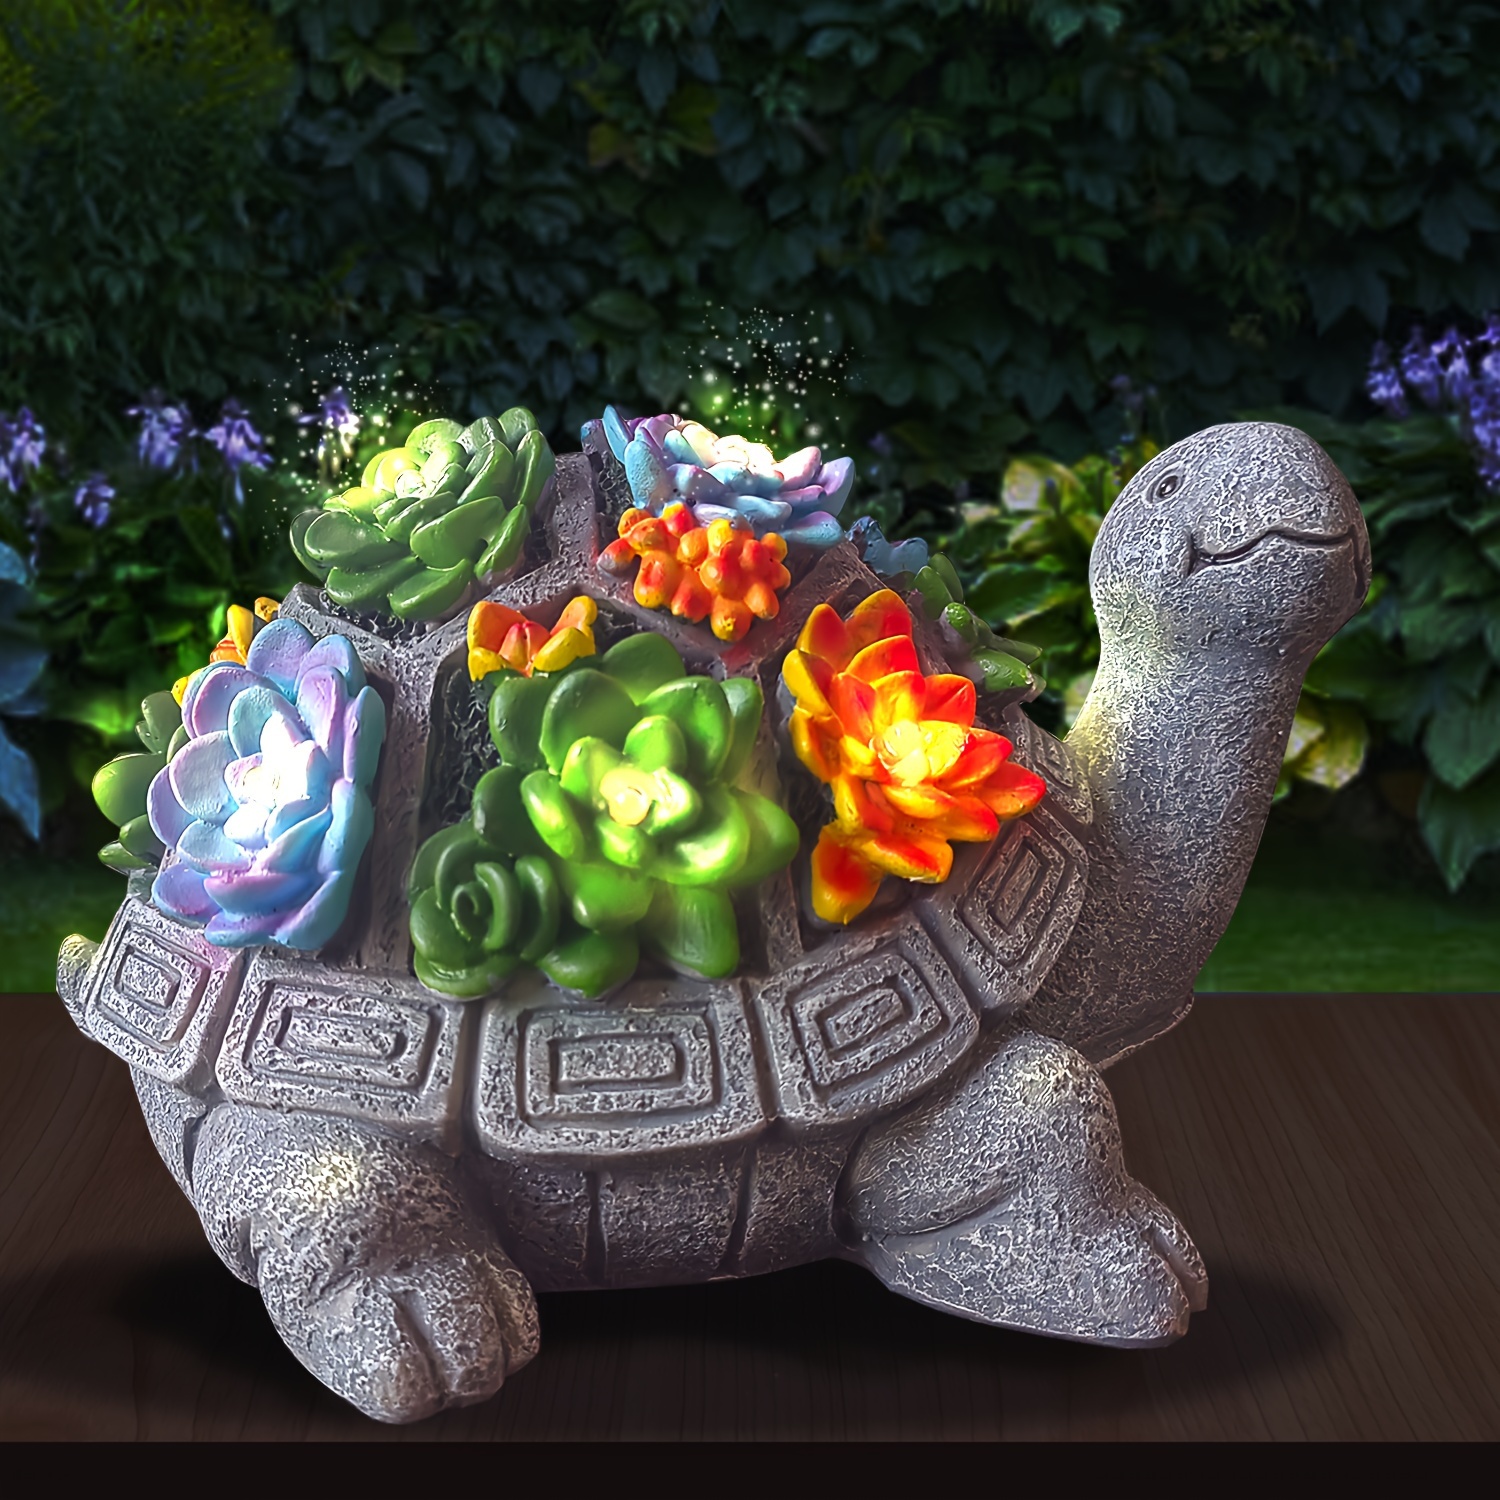 

1pc Solar Turtle Garden Decor Statue, Resin 7 Led Animal Desktop Sculpture For Moss Landscape, Yard, Lawn, Patio, Pool Decor, For Easter, Thanksgiving, Mother's Day, Creative Gift Idea